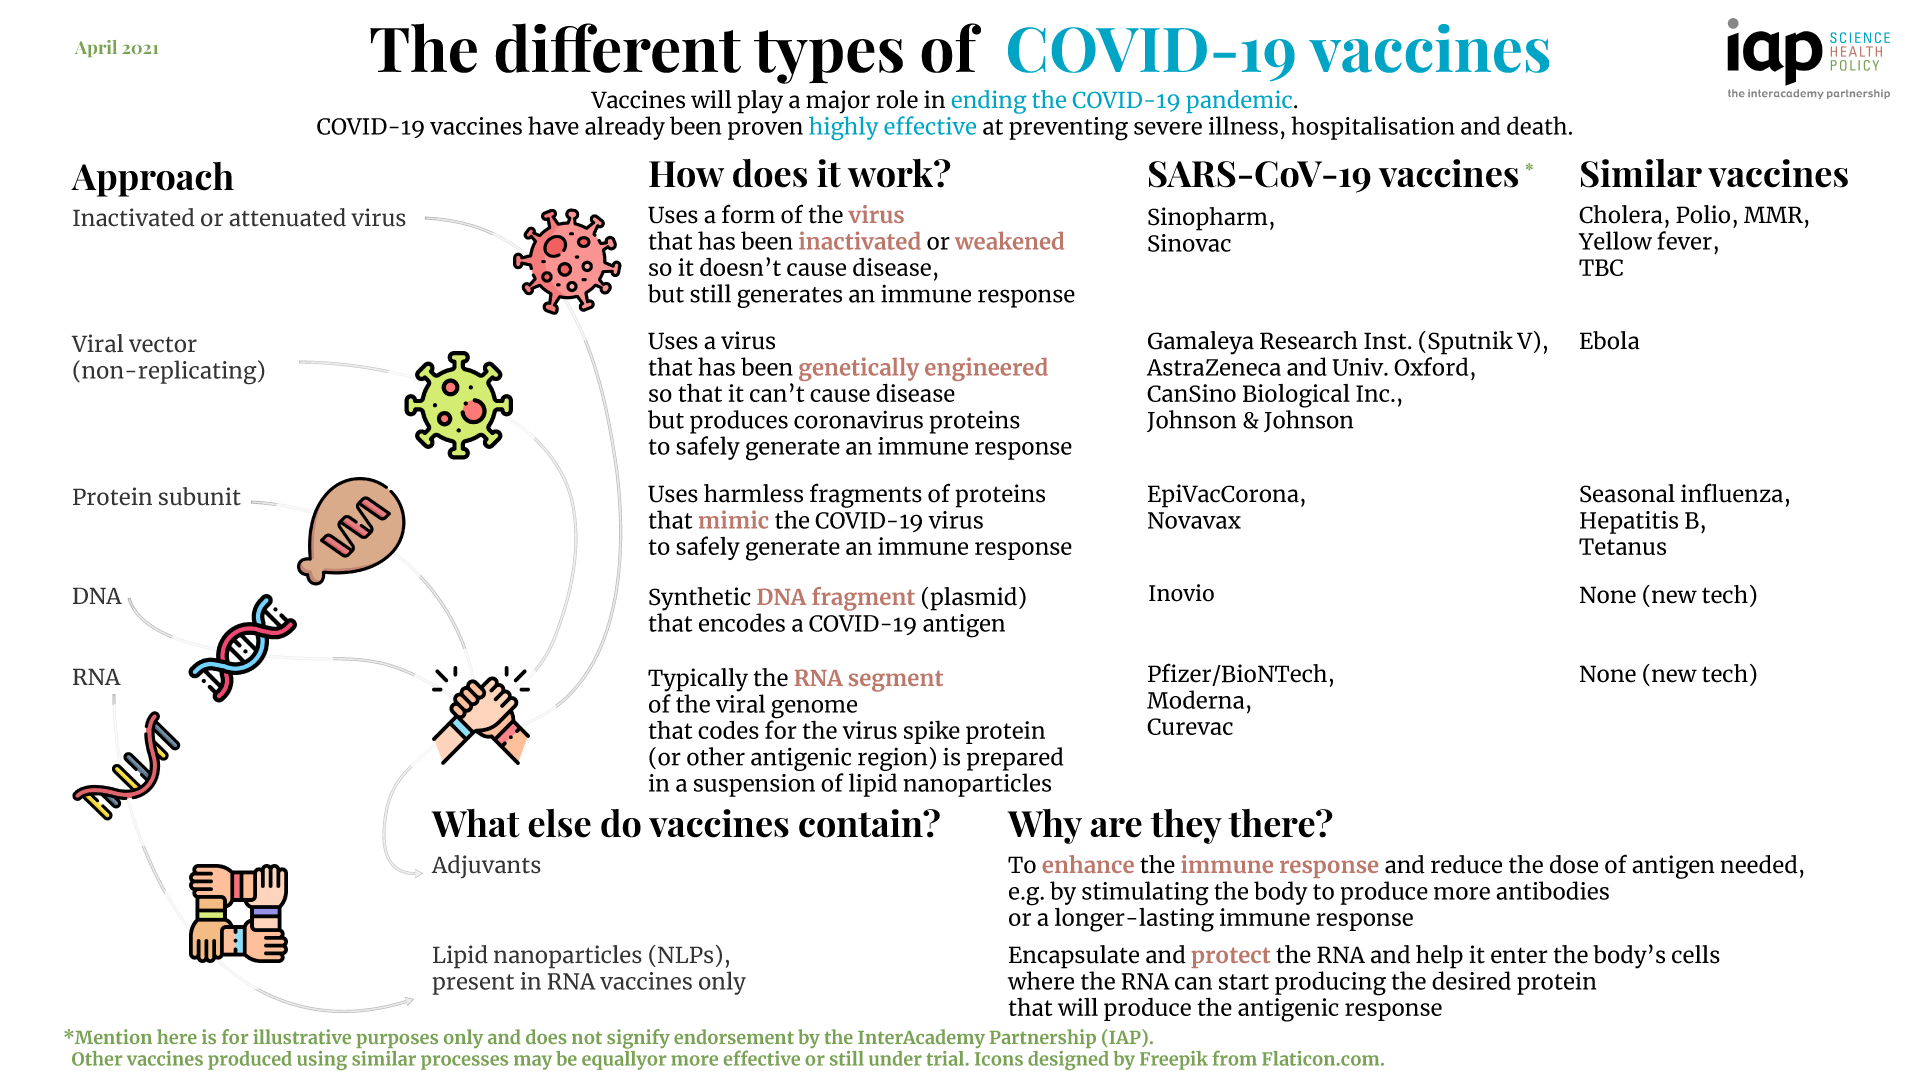 IAP infographic on COVID-19 vaccines